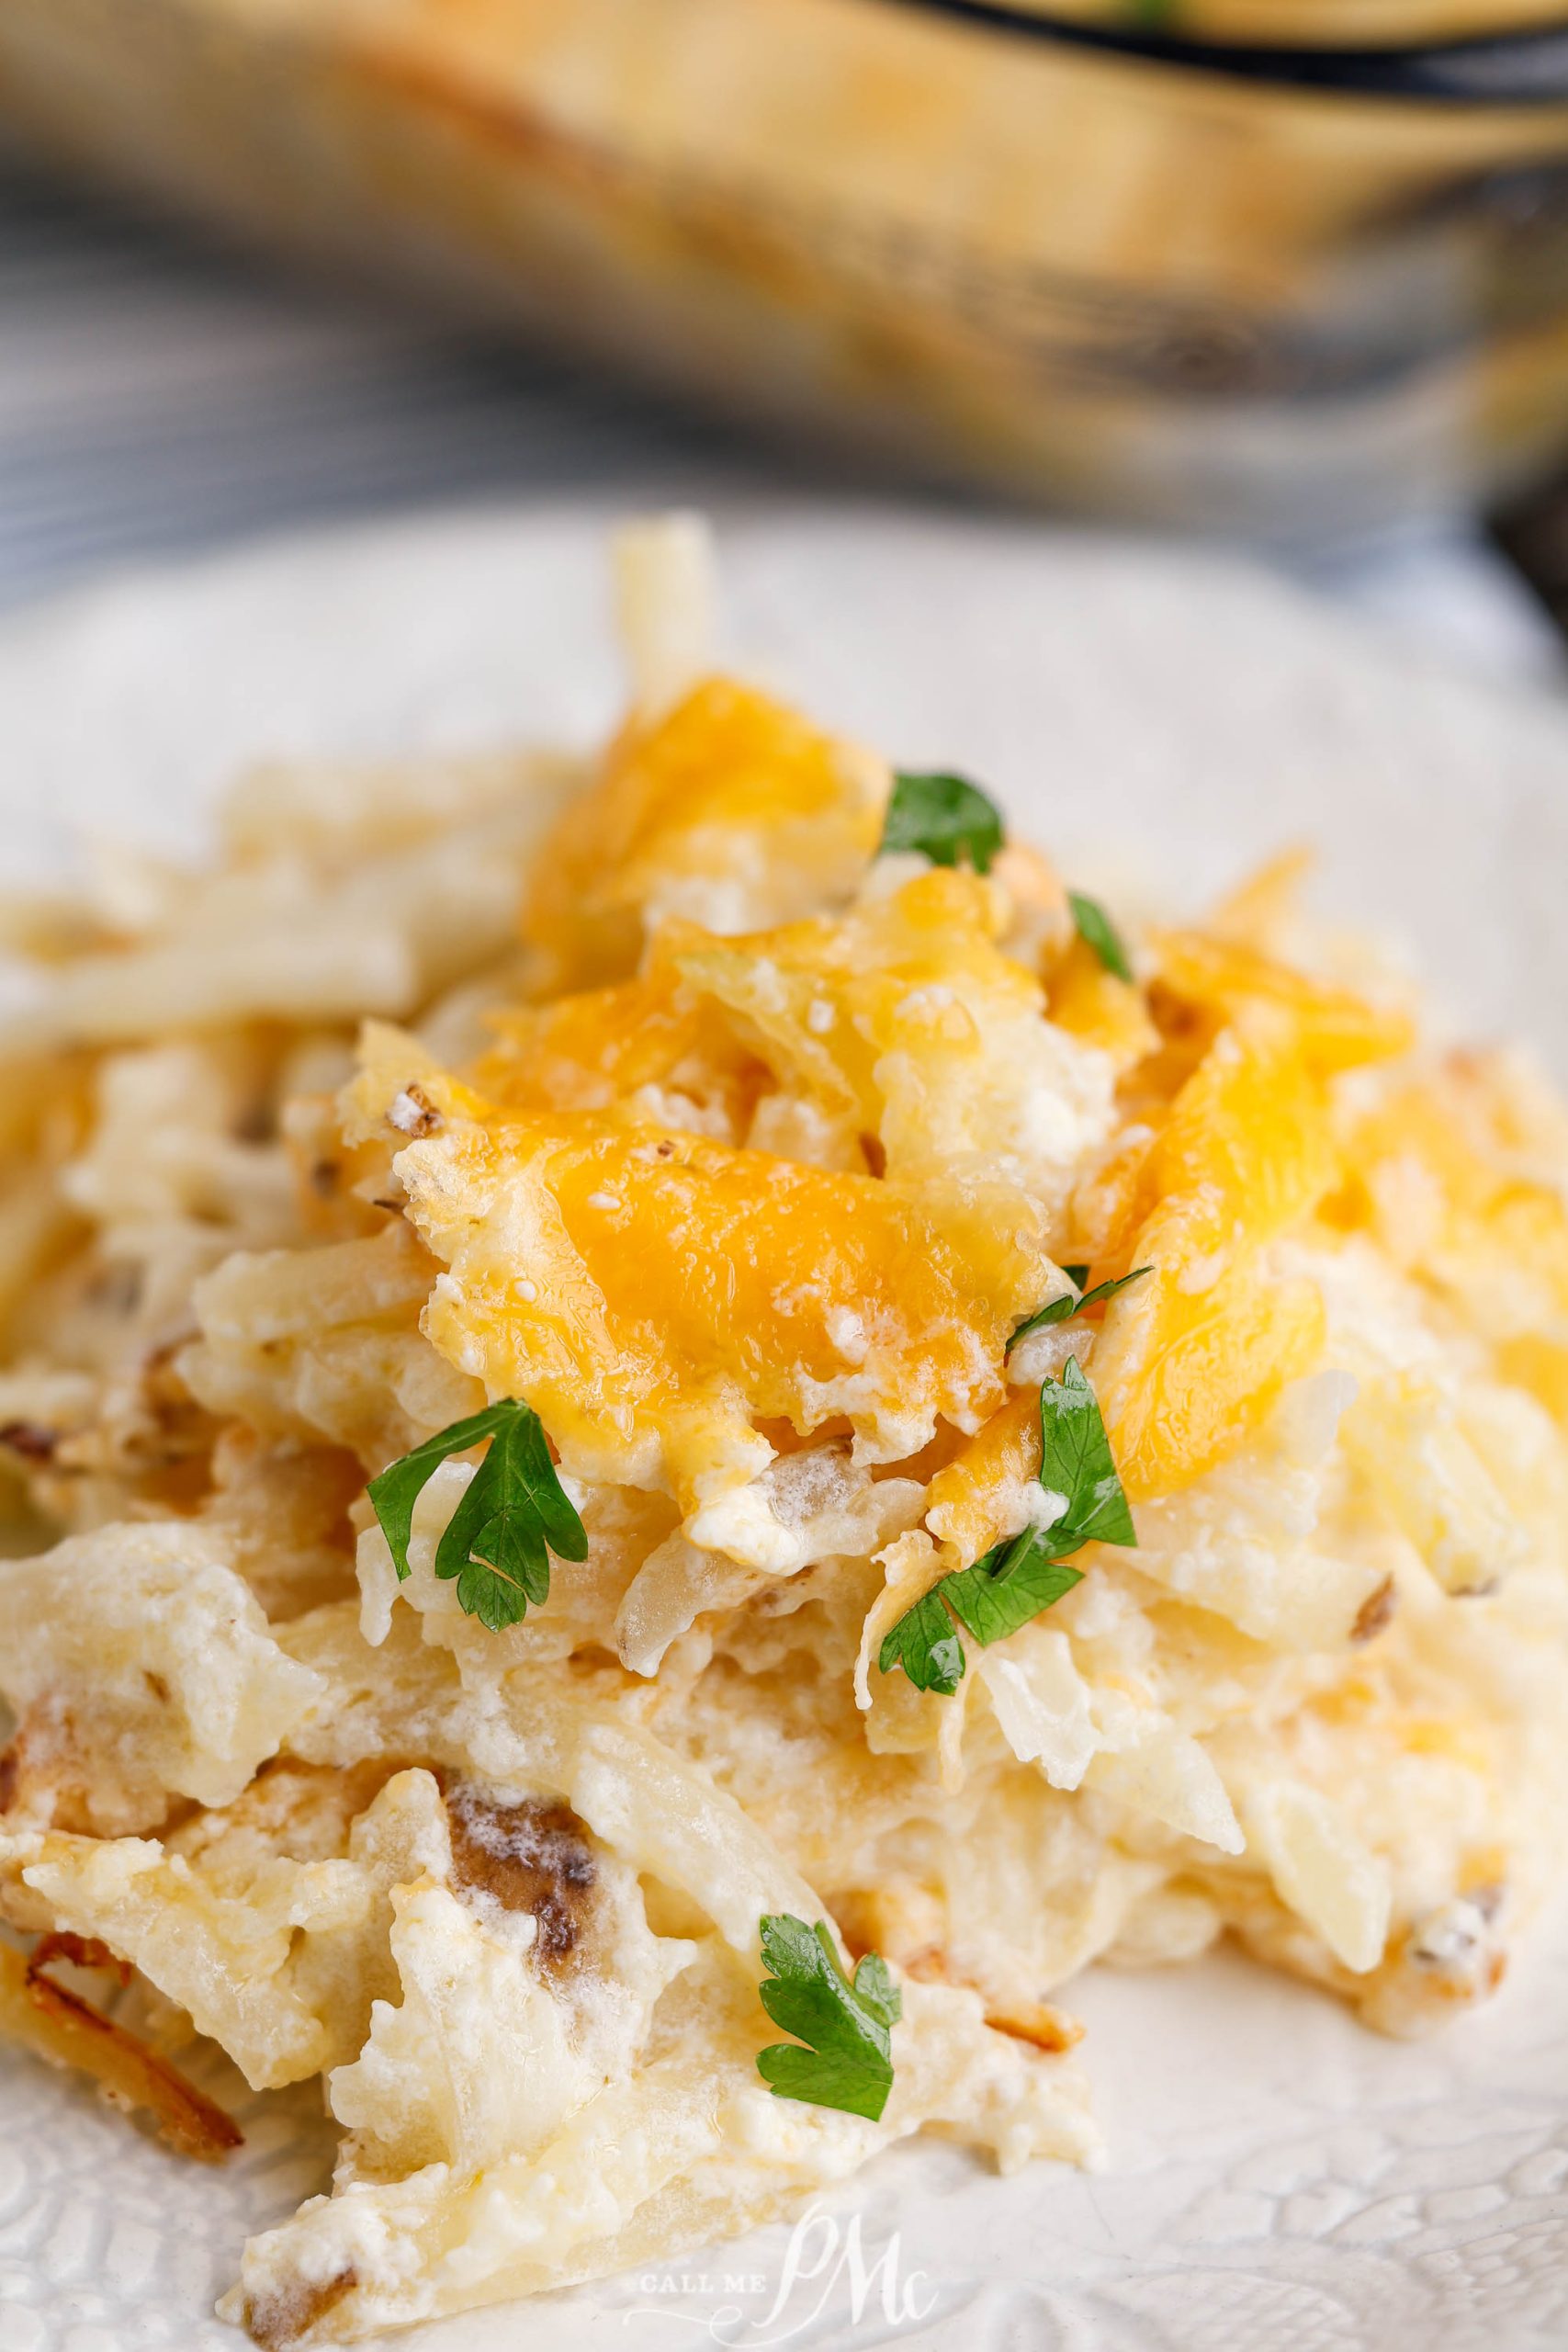 Cheesy hashbrowns on a plate.